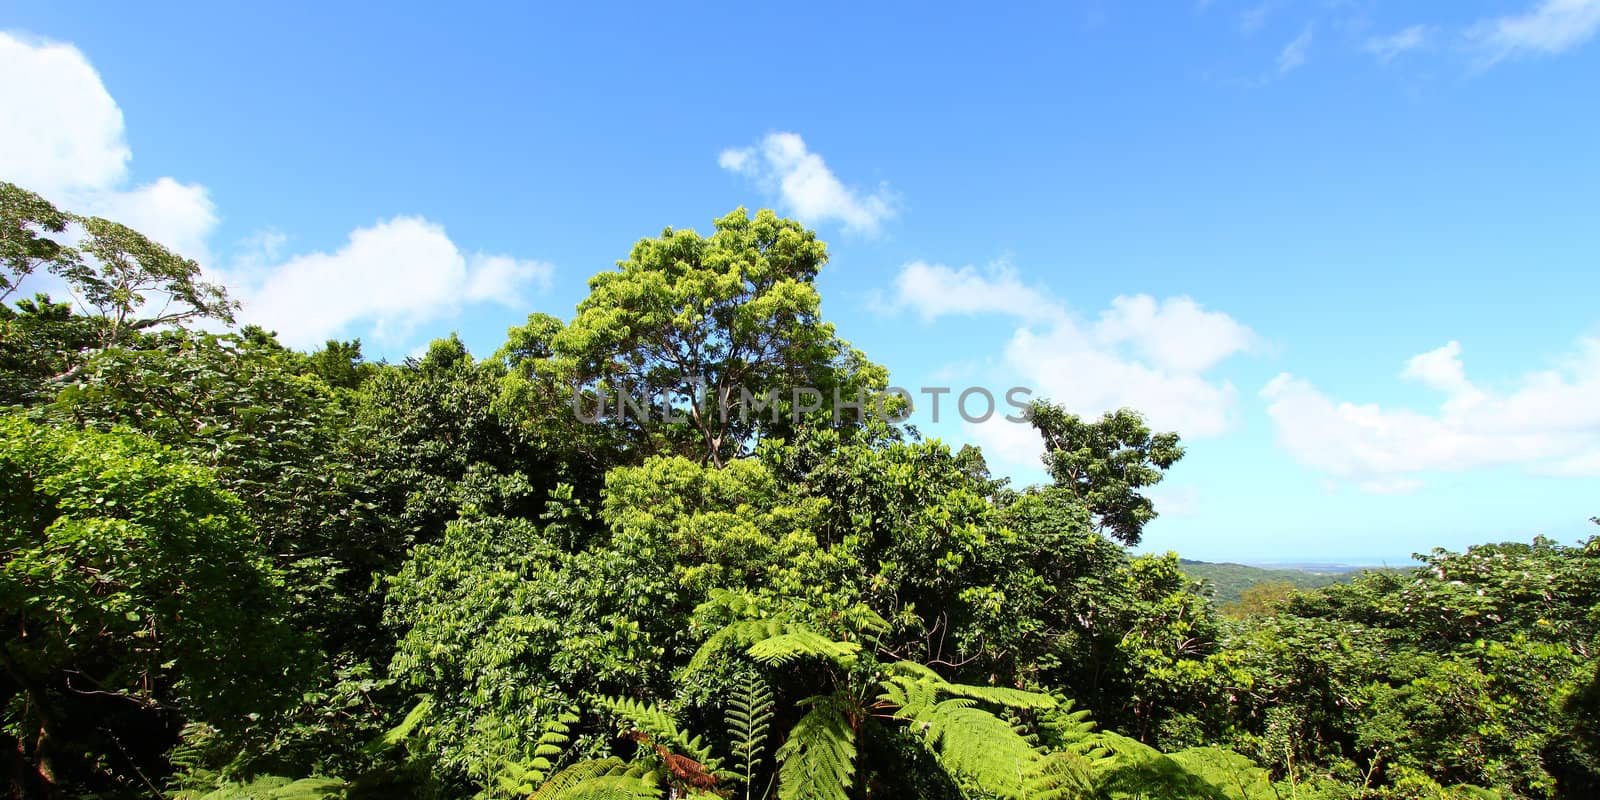 Panoramic view of the famous El Yunque Rainforest of Puerto Rico.